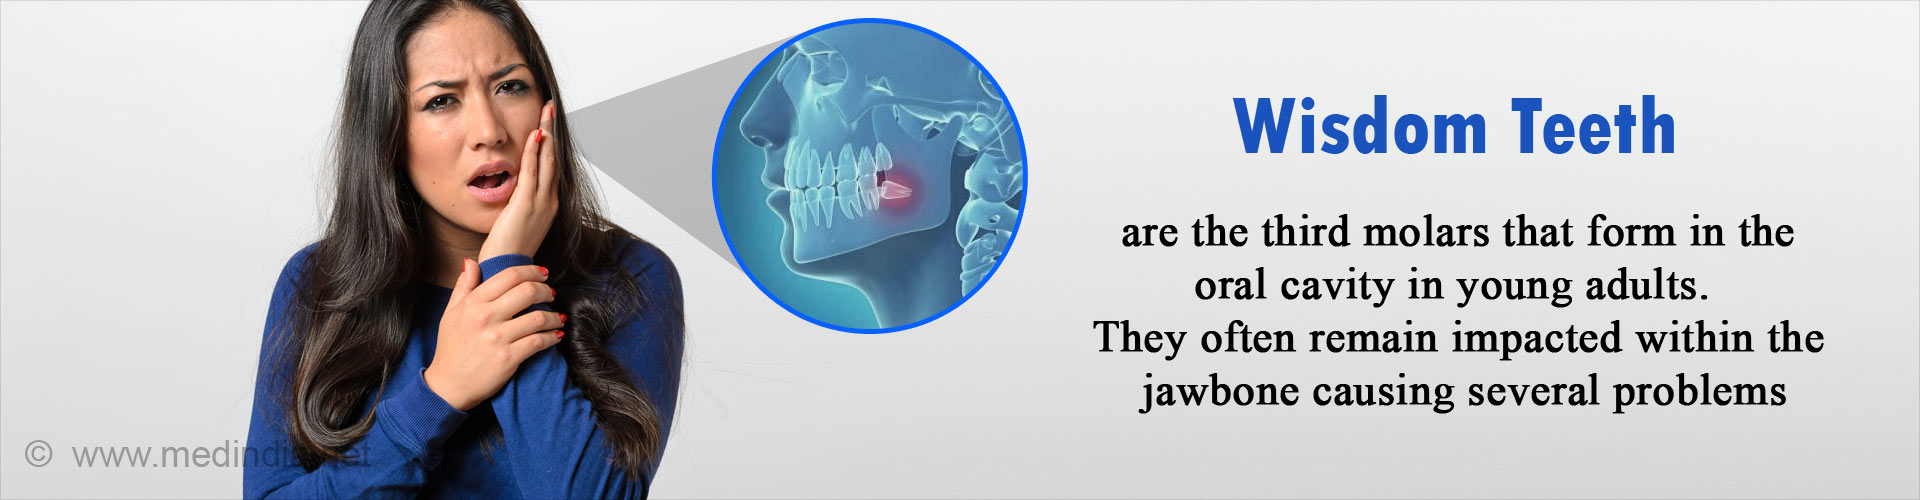 Wisdom teeth are the third molars that form in the oral cavity in young adults. They often remain impacted within the jawbone causing several problems.